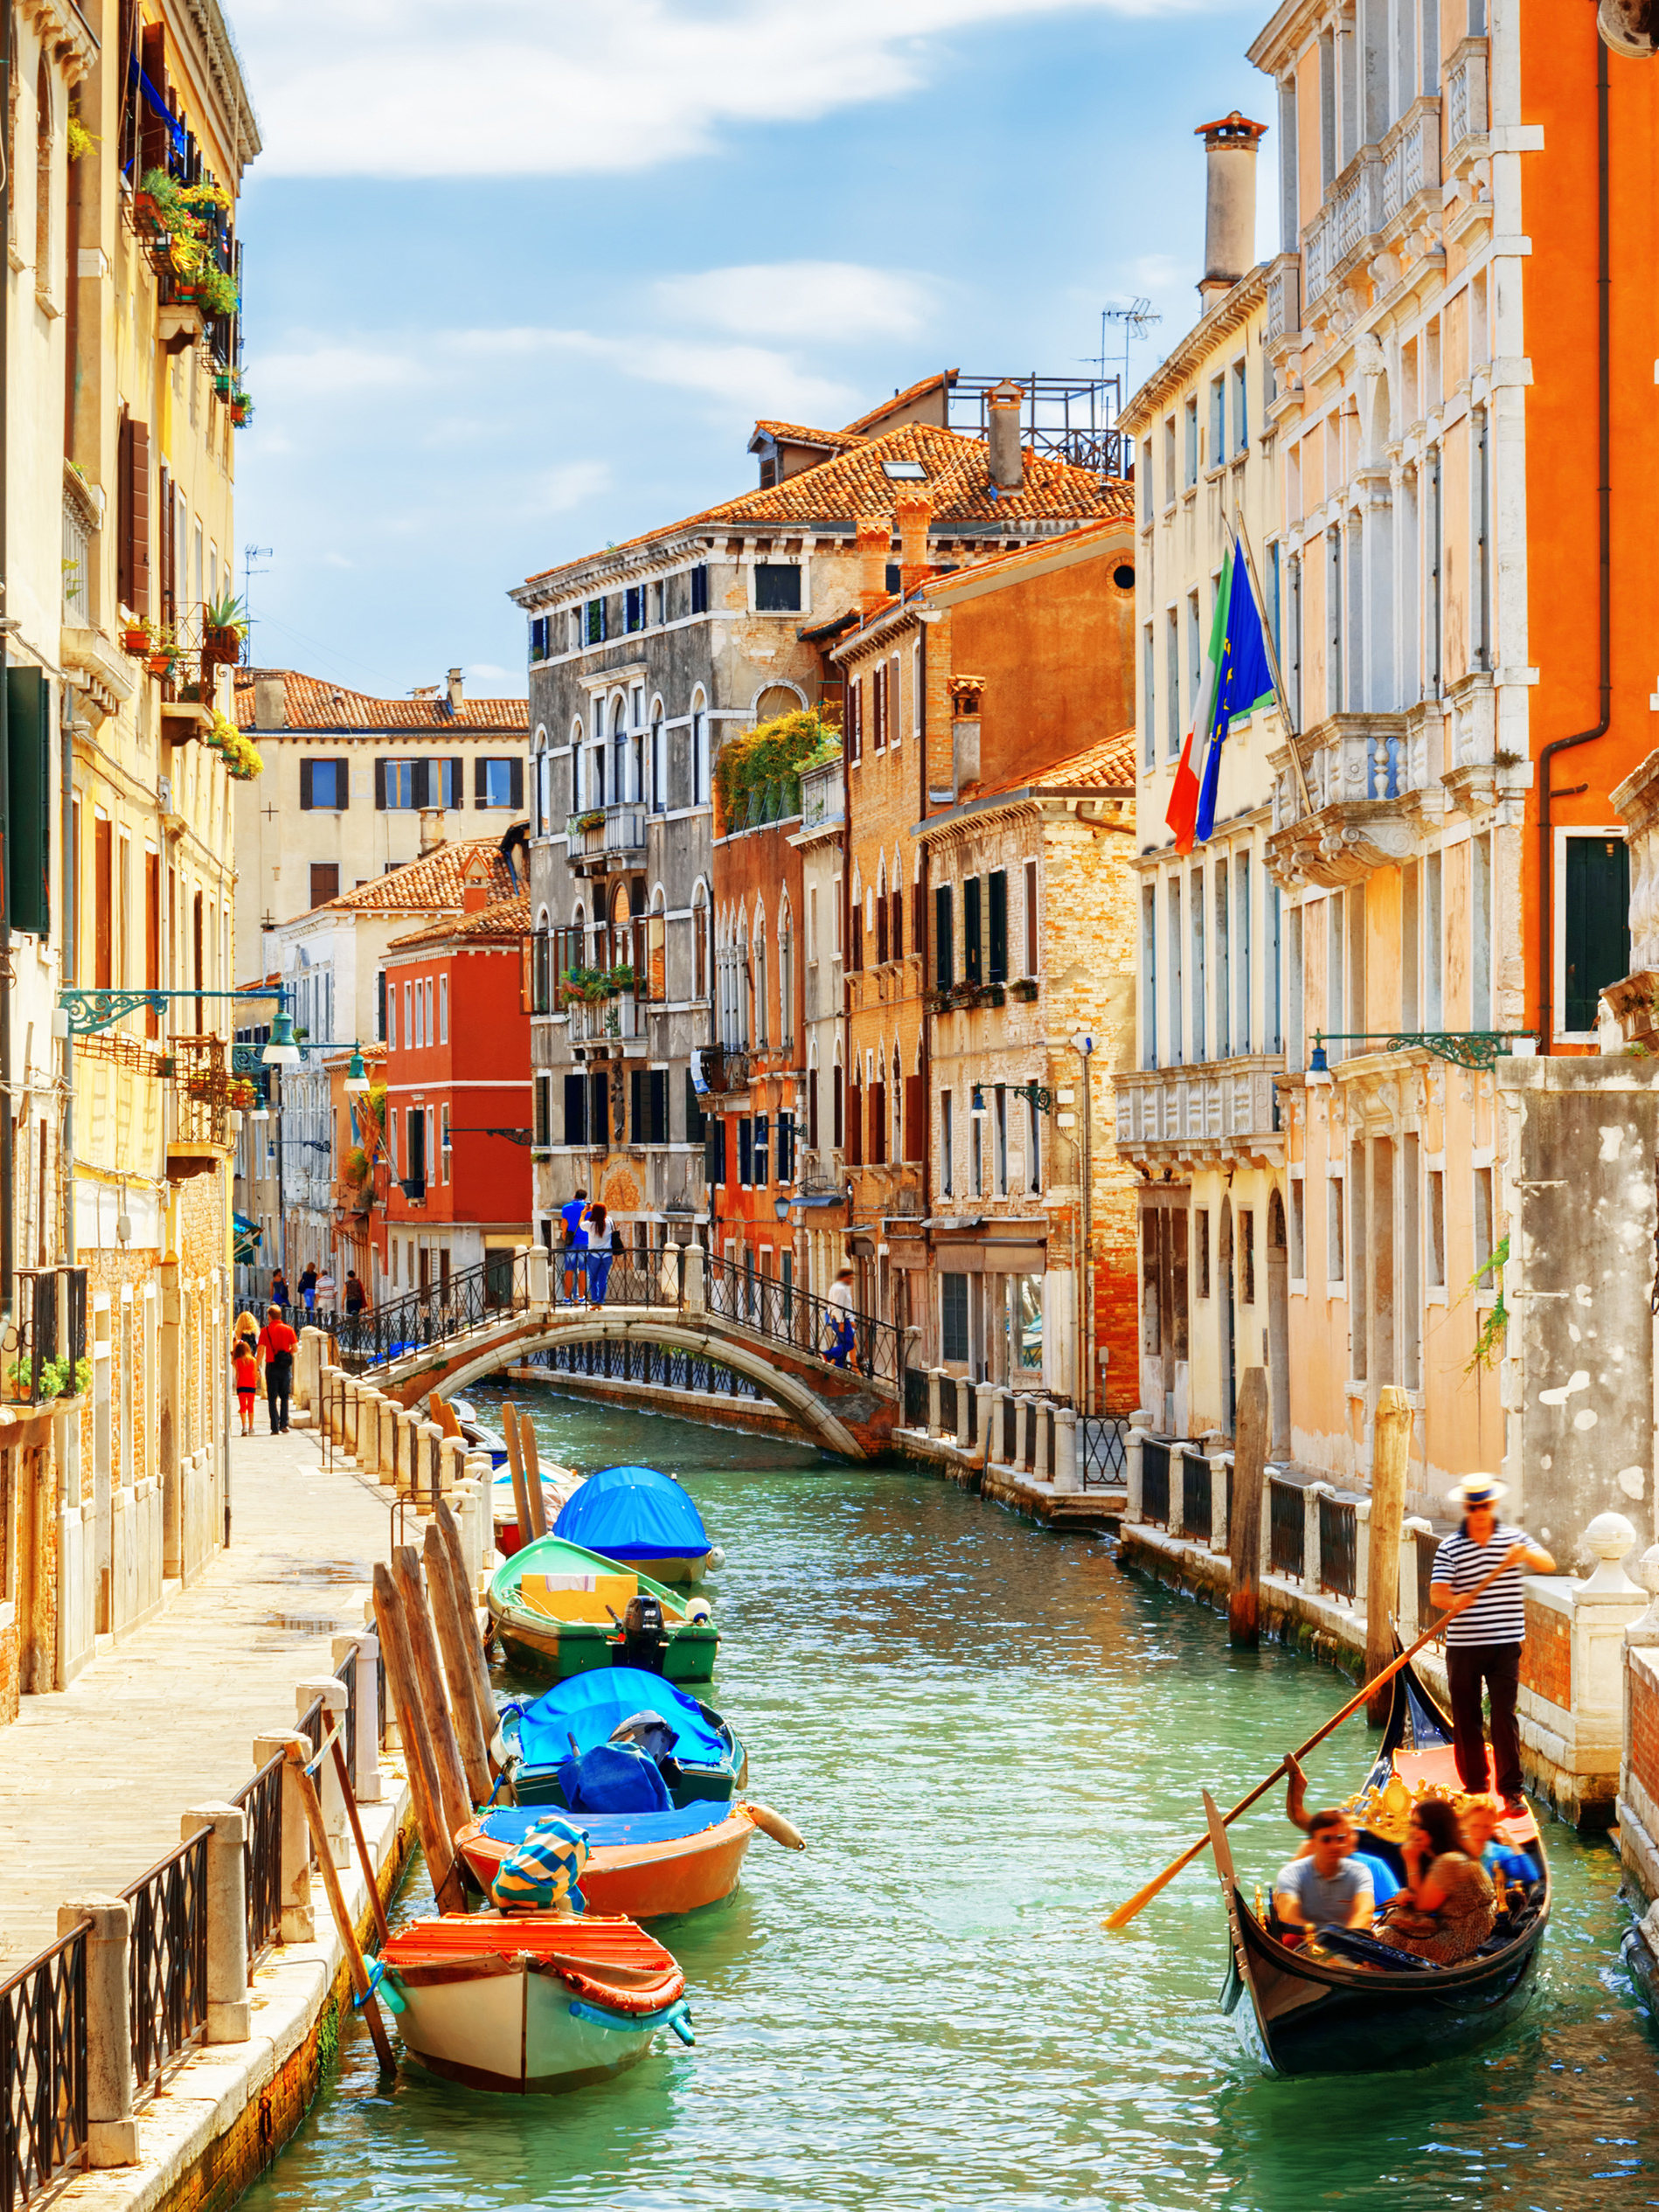 Best things to do in Venice 2021 | Attractions & activities